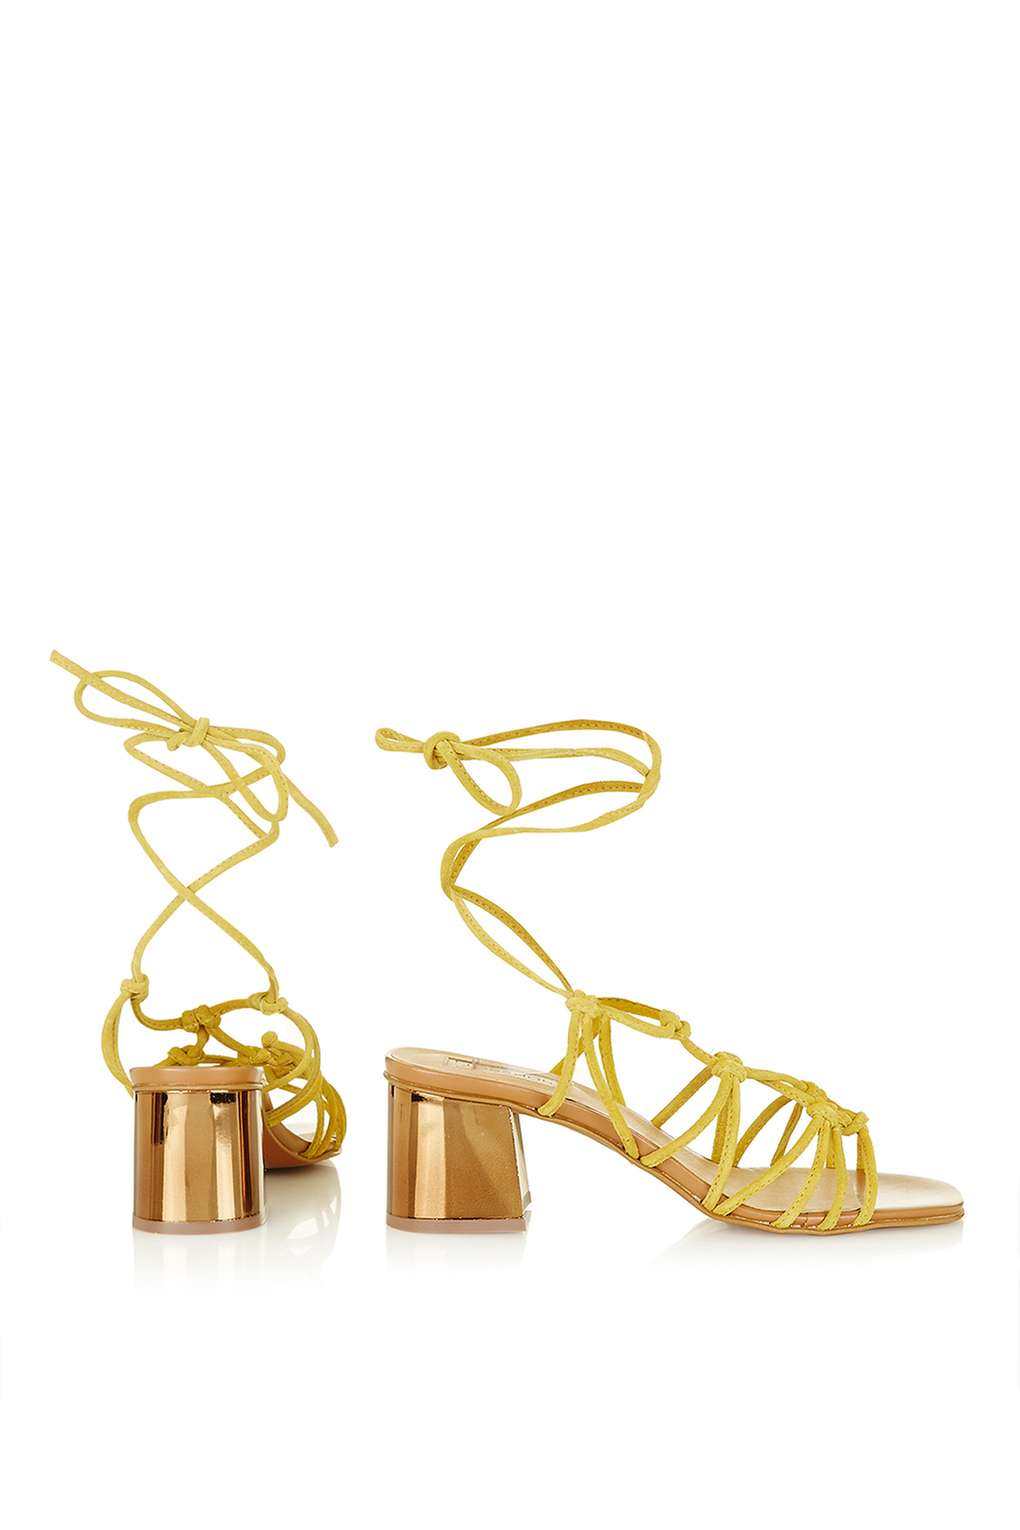 NAPOLI Knotted Heeled Sandals